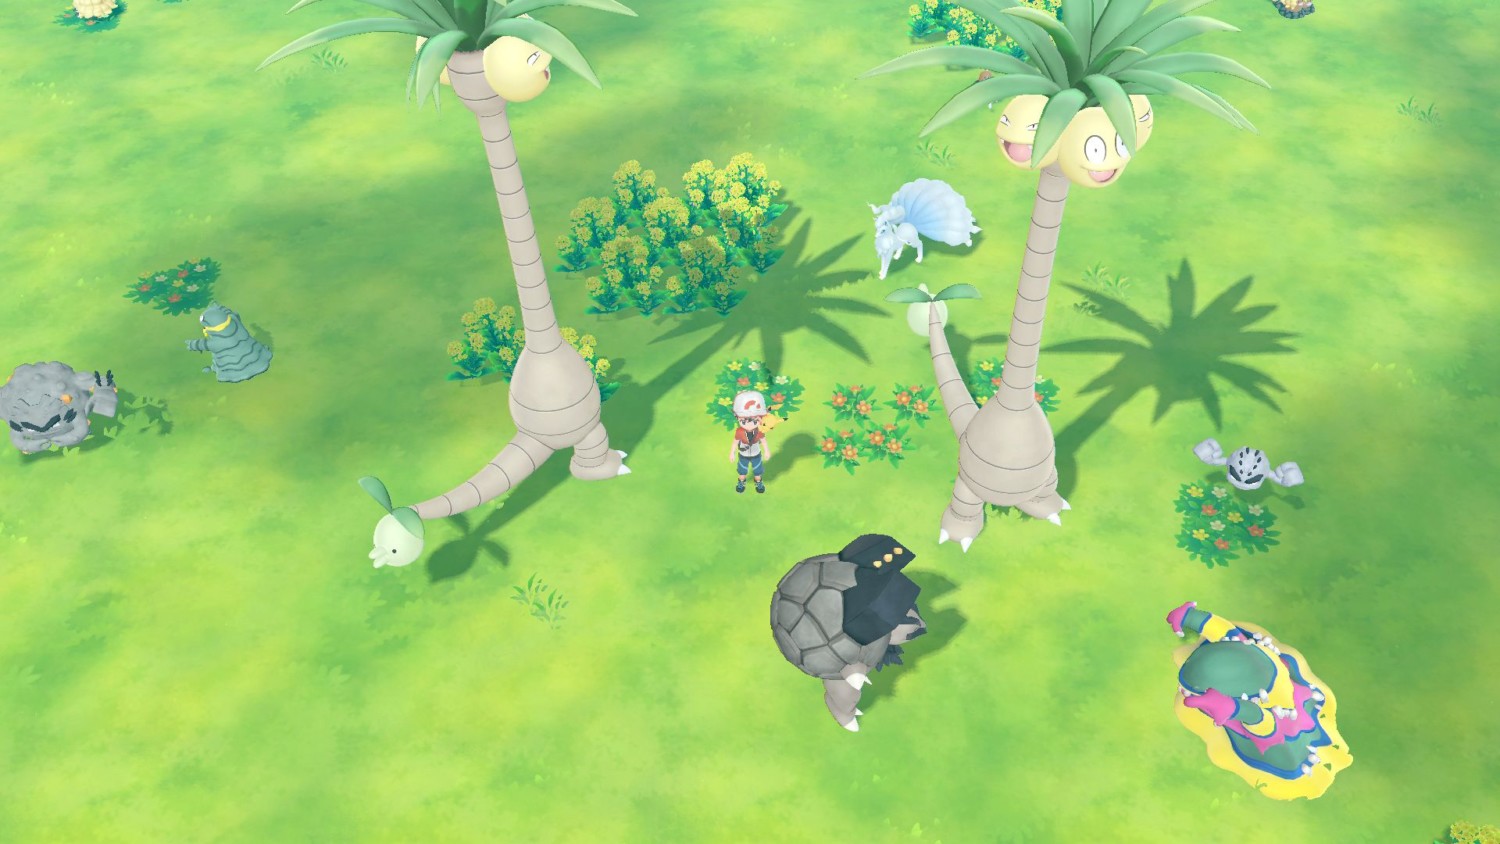 How to Get ALL Alolan Forms in Pokémon Let's Go Pikachu and Eevee - ALL  Alolan Form Locations! 